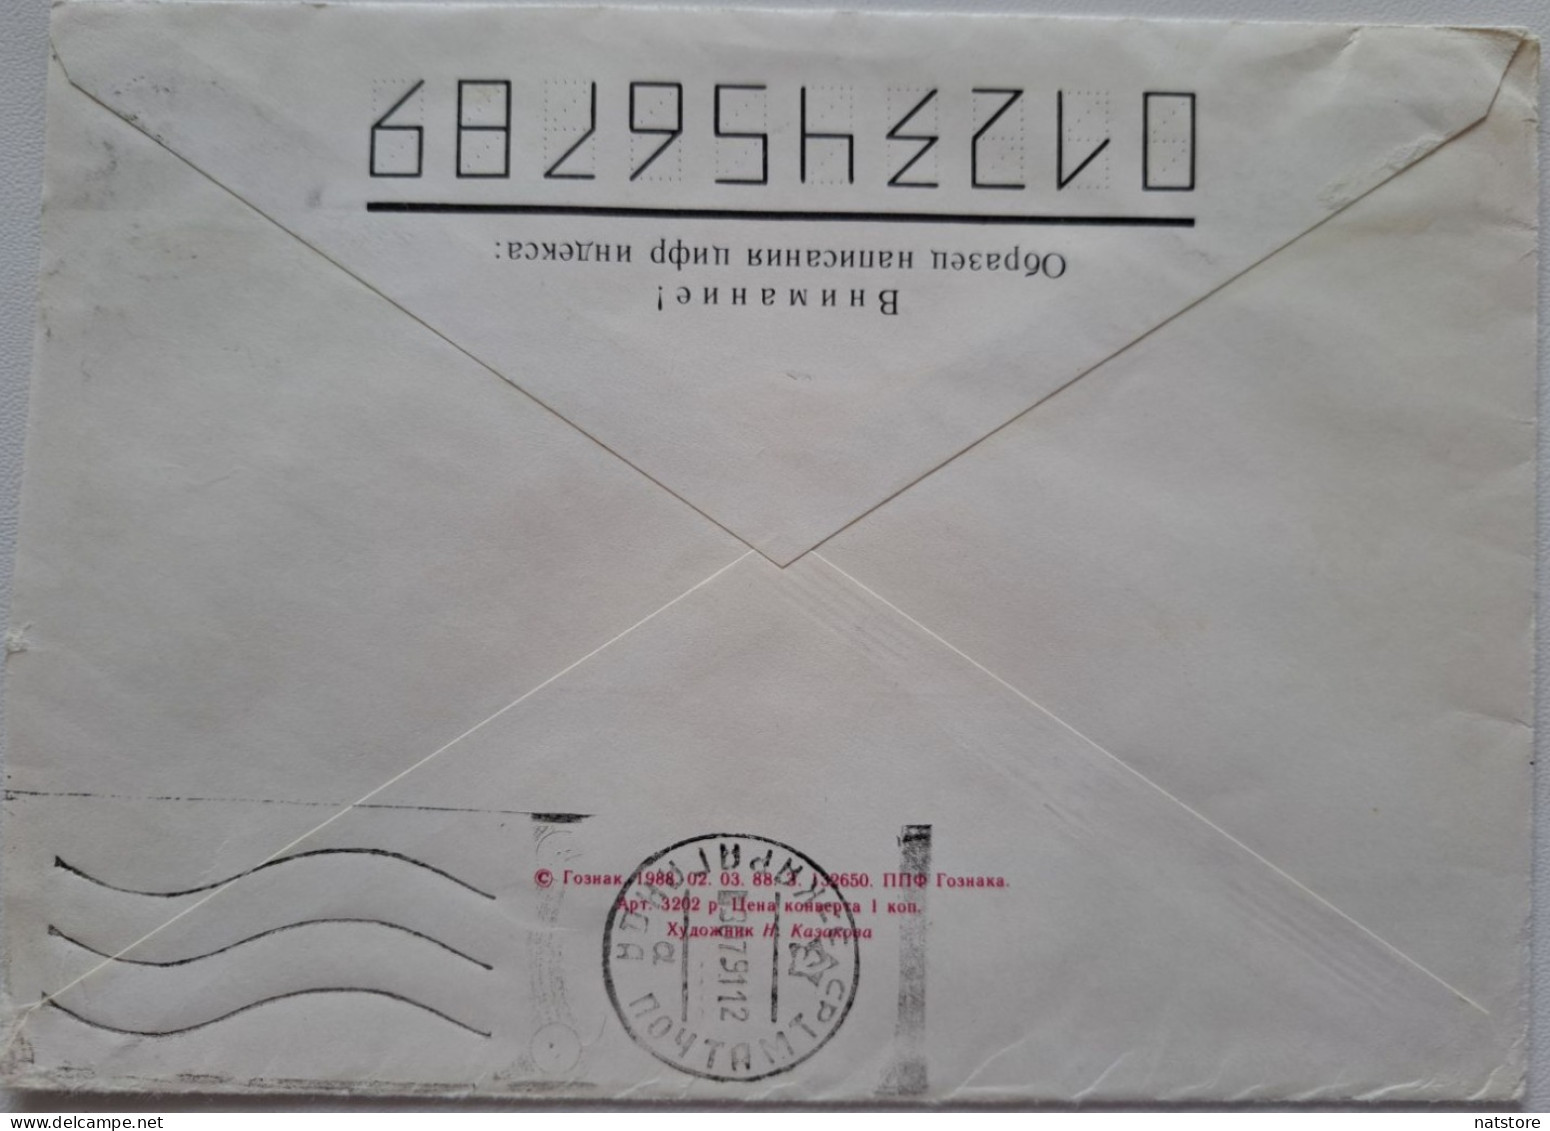 1988..USSR..COVER WITH MACHINE STAMP..PAST MAIL.. KAKHOVKA..LEGENDARY CART. - Covers & Documents